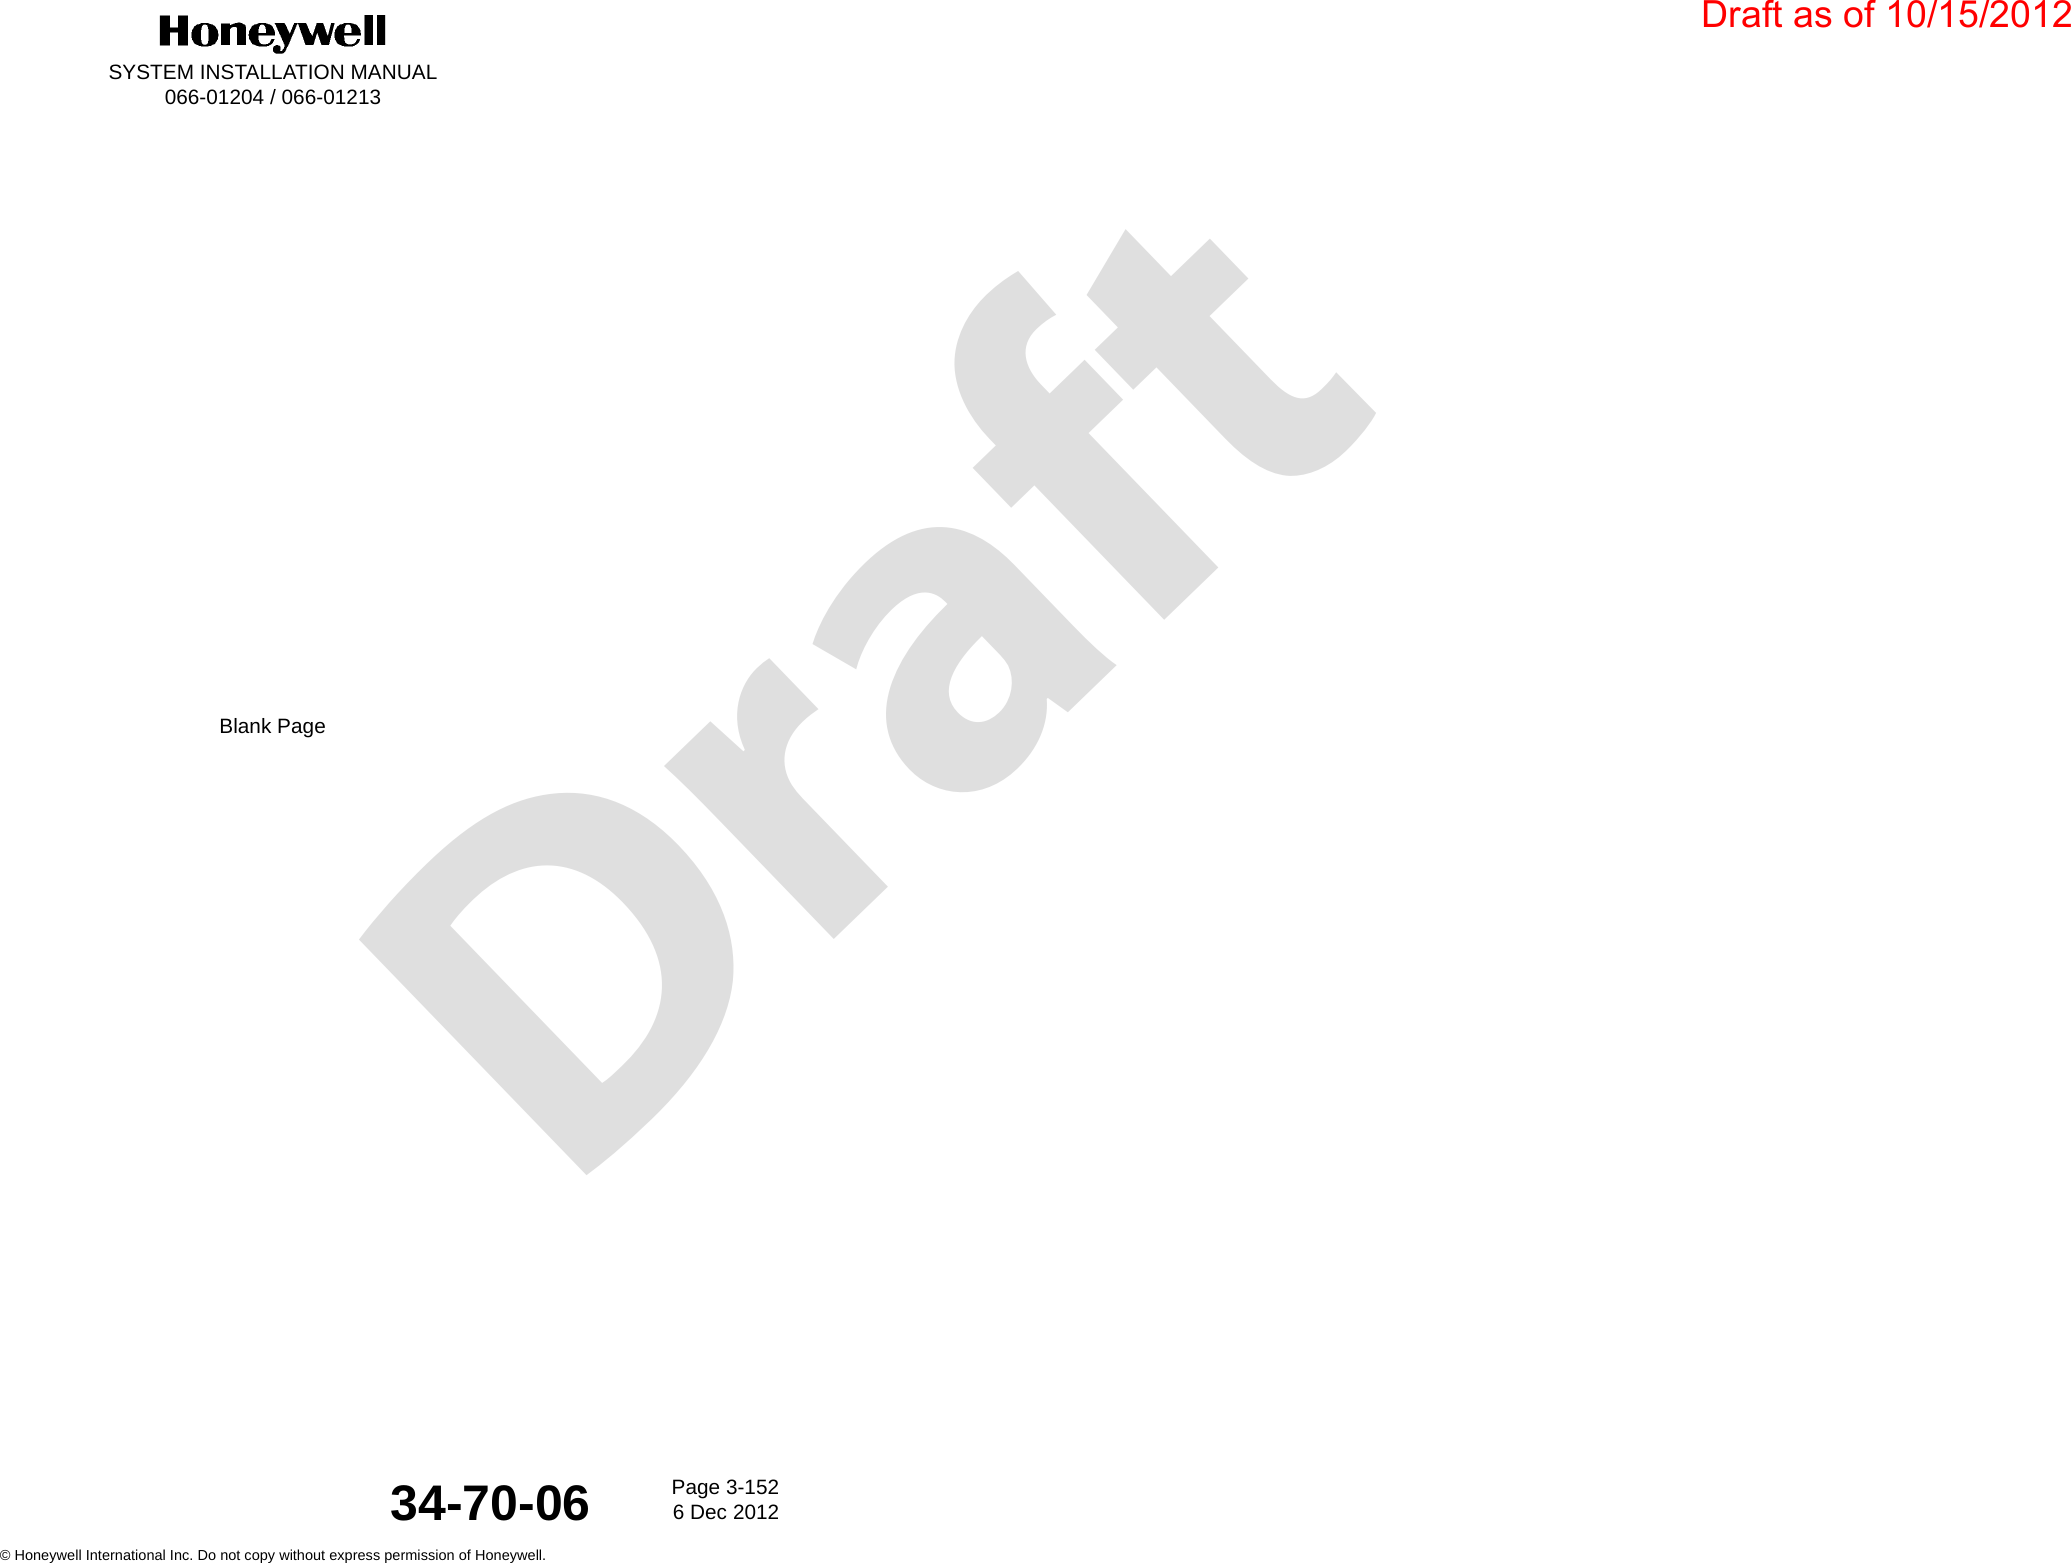 DraftSYSTEM INSTALLATION MANUAL066-01204 / 066-01213Page 3-1526 Dec 2012© Honeywell International Inc. Do not copy without express permission of Honeywell.34-70-06Blank PageDraft as of 10/15/2012